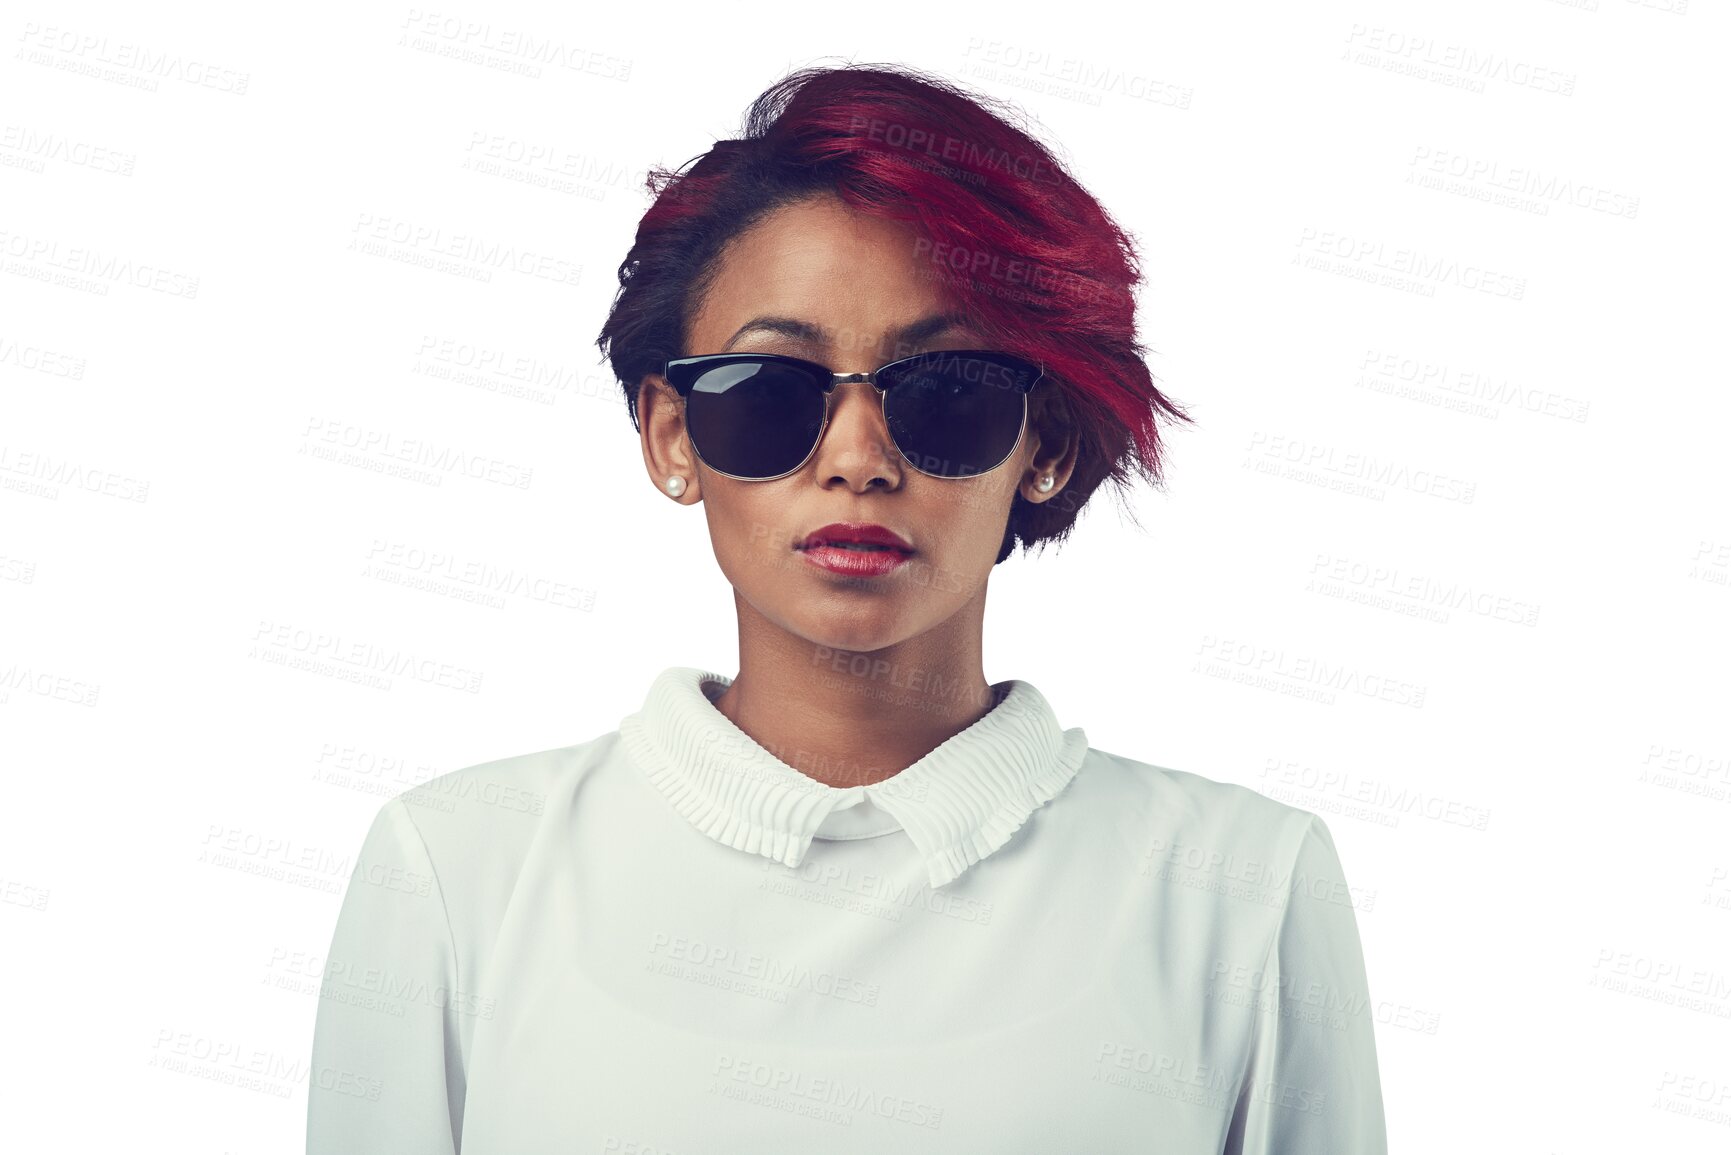 Buy stock photo Fashion, confidence and portrait of woman with sunglasses on isolated, png and transparent background. Serious, beauty and face of person with trendy hairstyle, stylish accessories and casual clothes